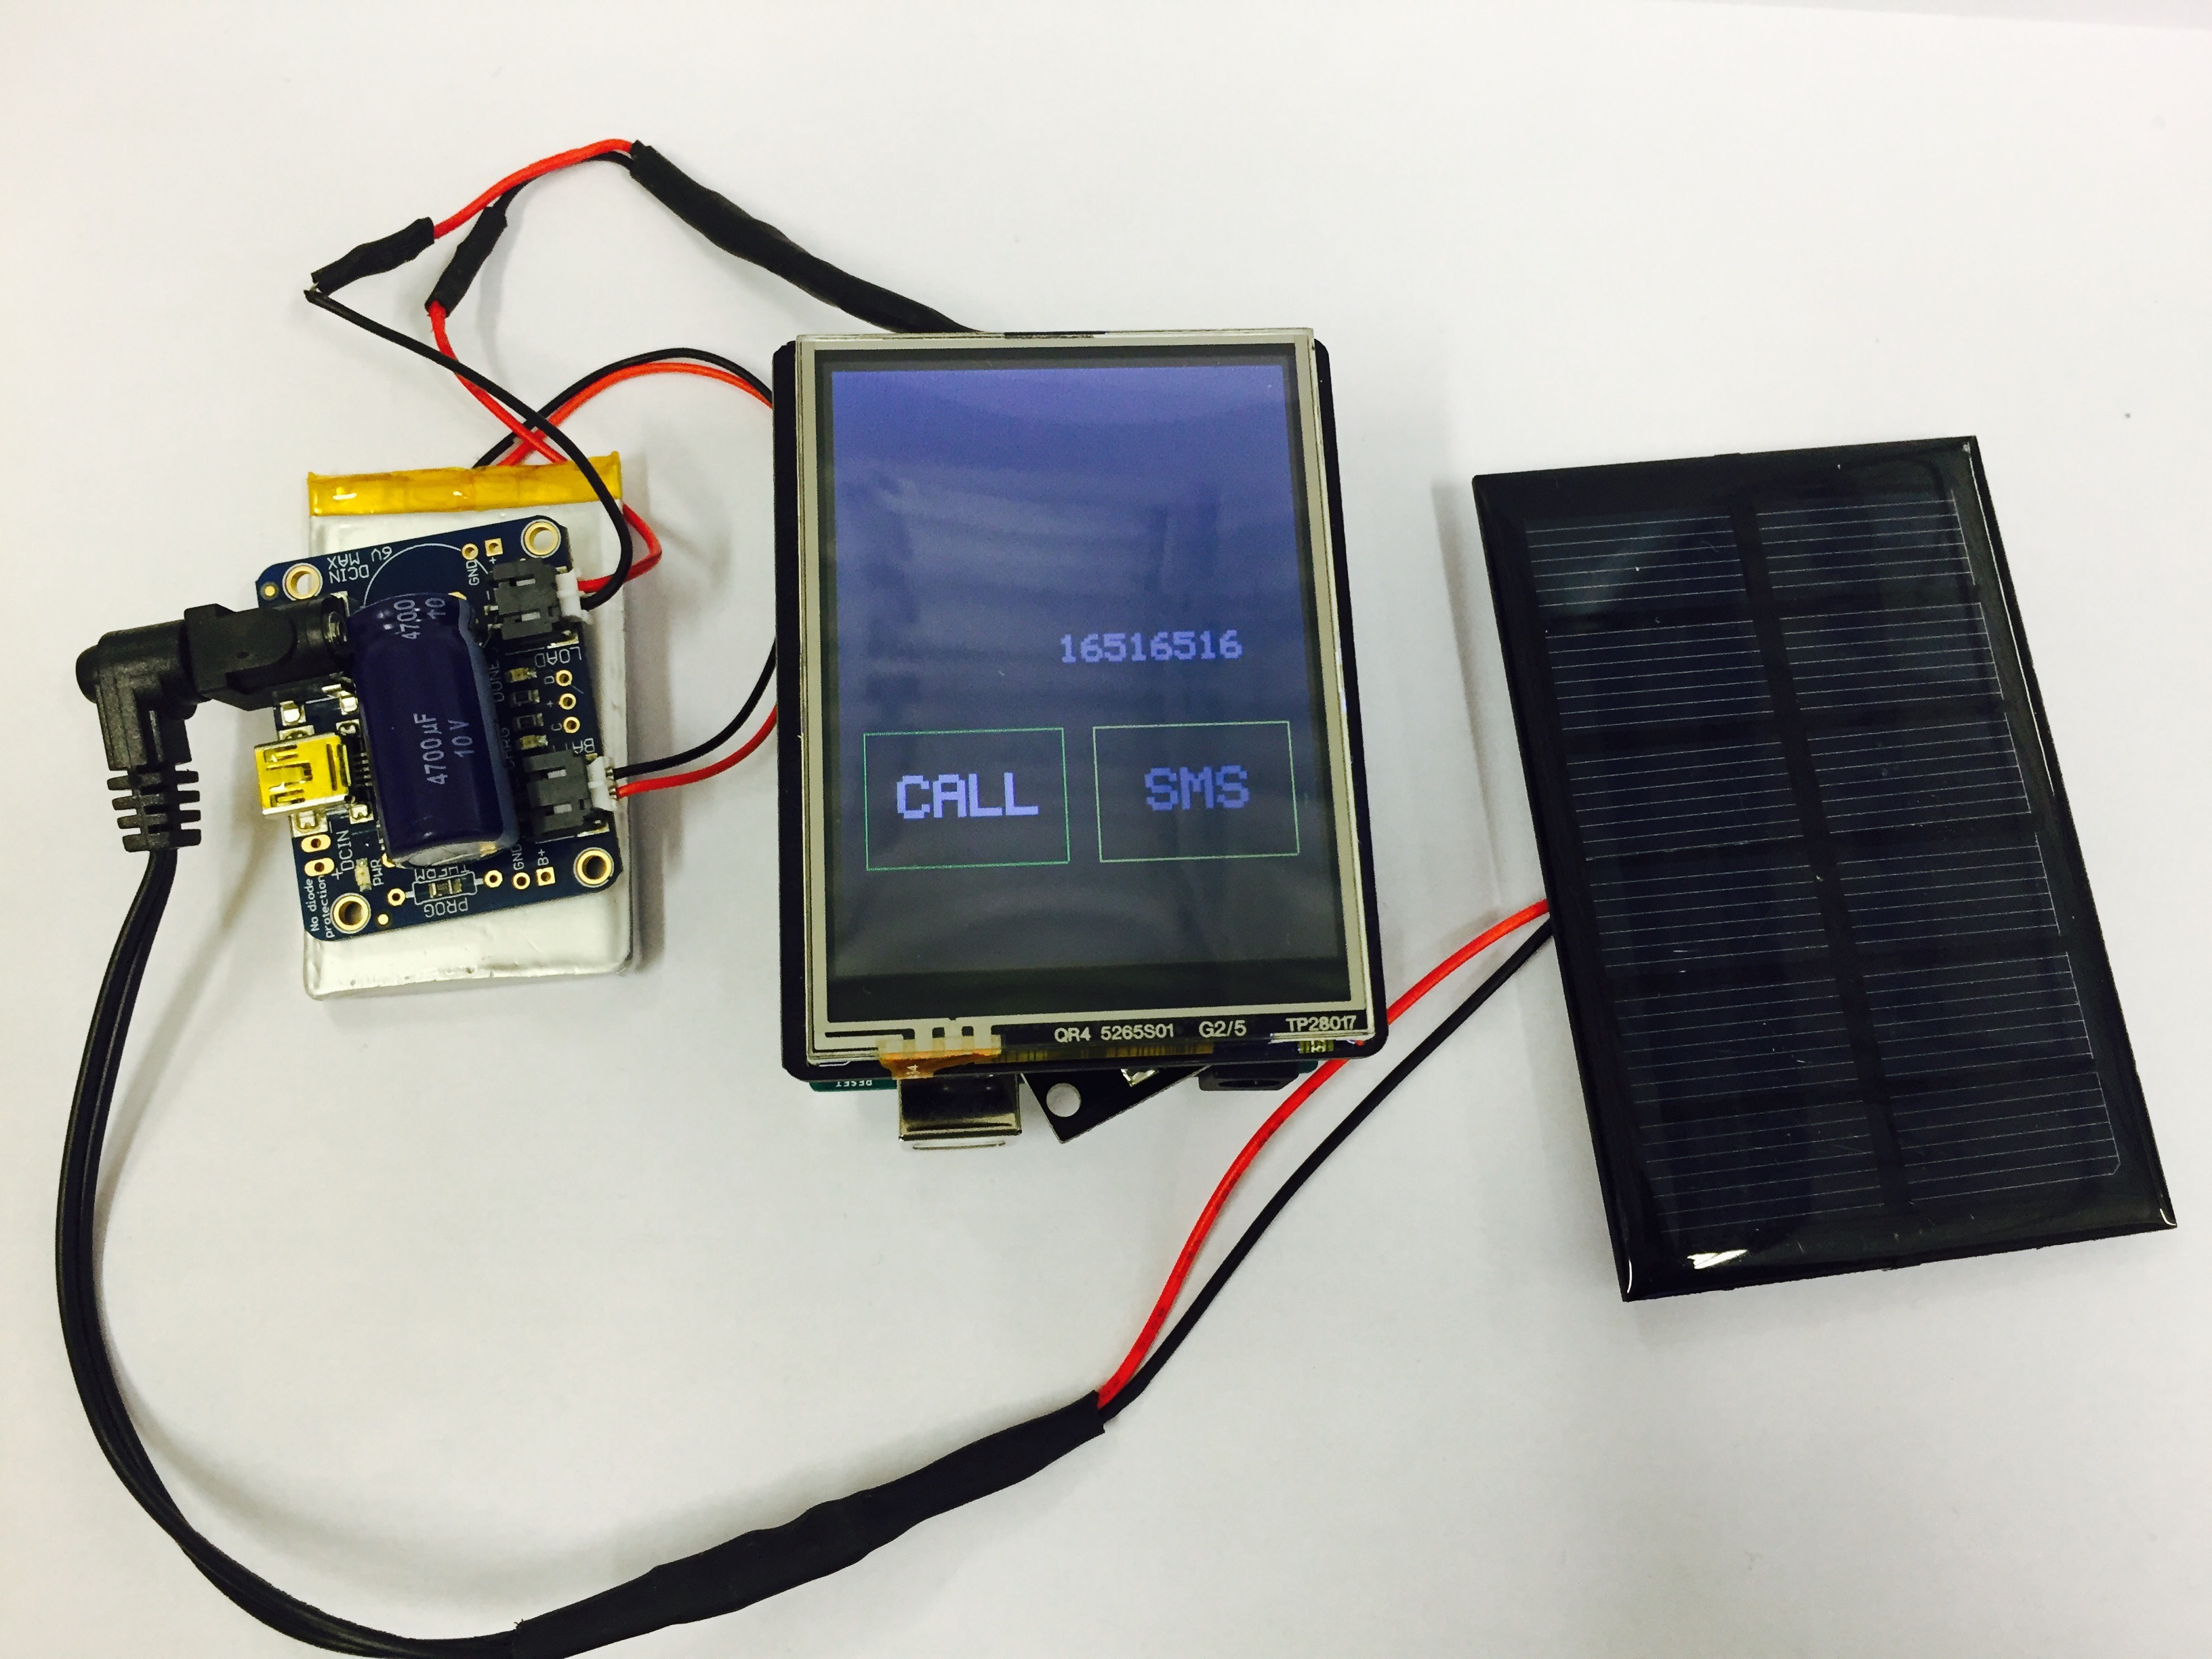 Building a Usable Cell Phone Powered by Solar Power